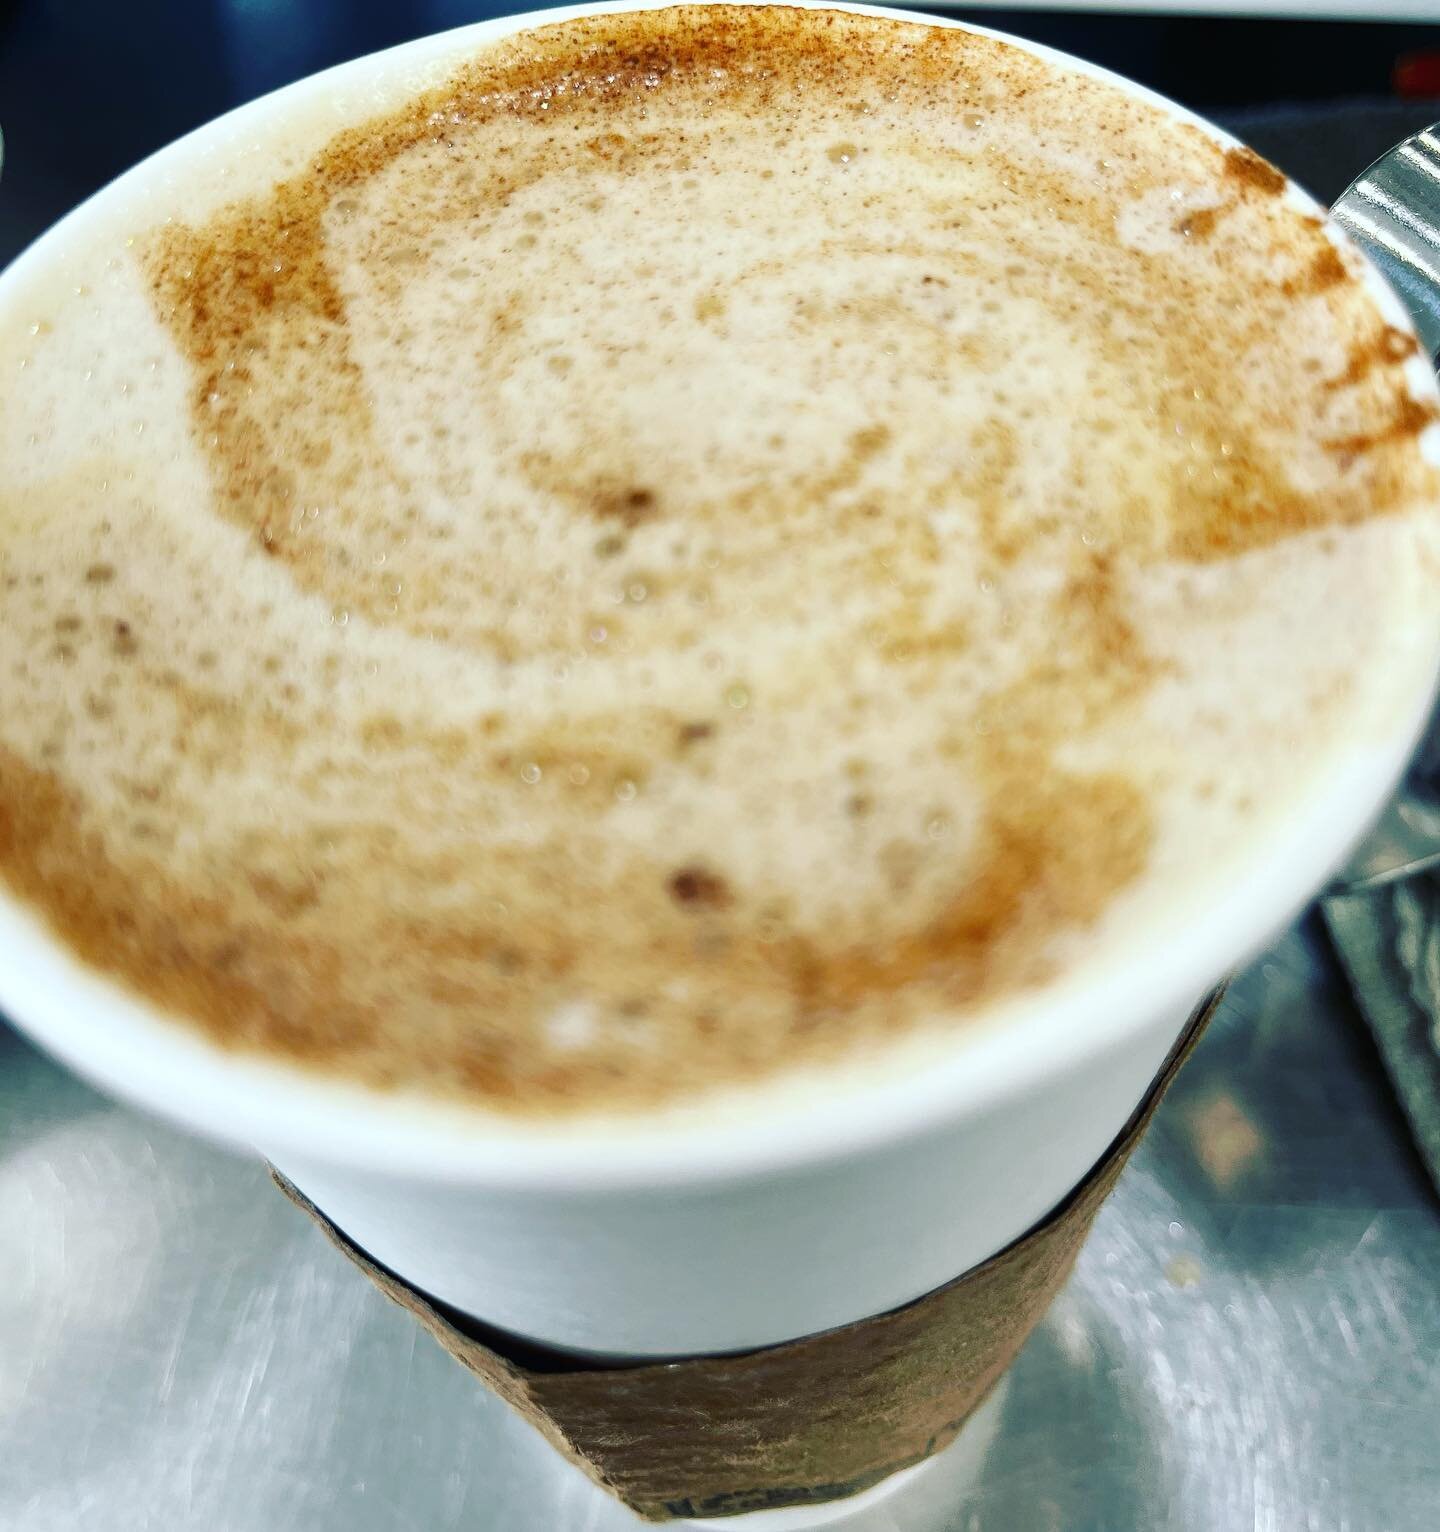 What a delicious Cinnamon Mocha latte! Come by between 12pm-2pm for yours half off ! #latte #wakeup #cinnamonmochalatte @sunnysidecup #happyhour